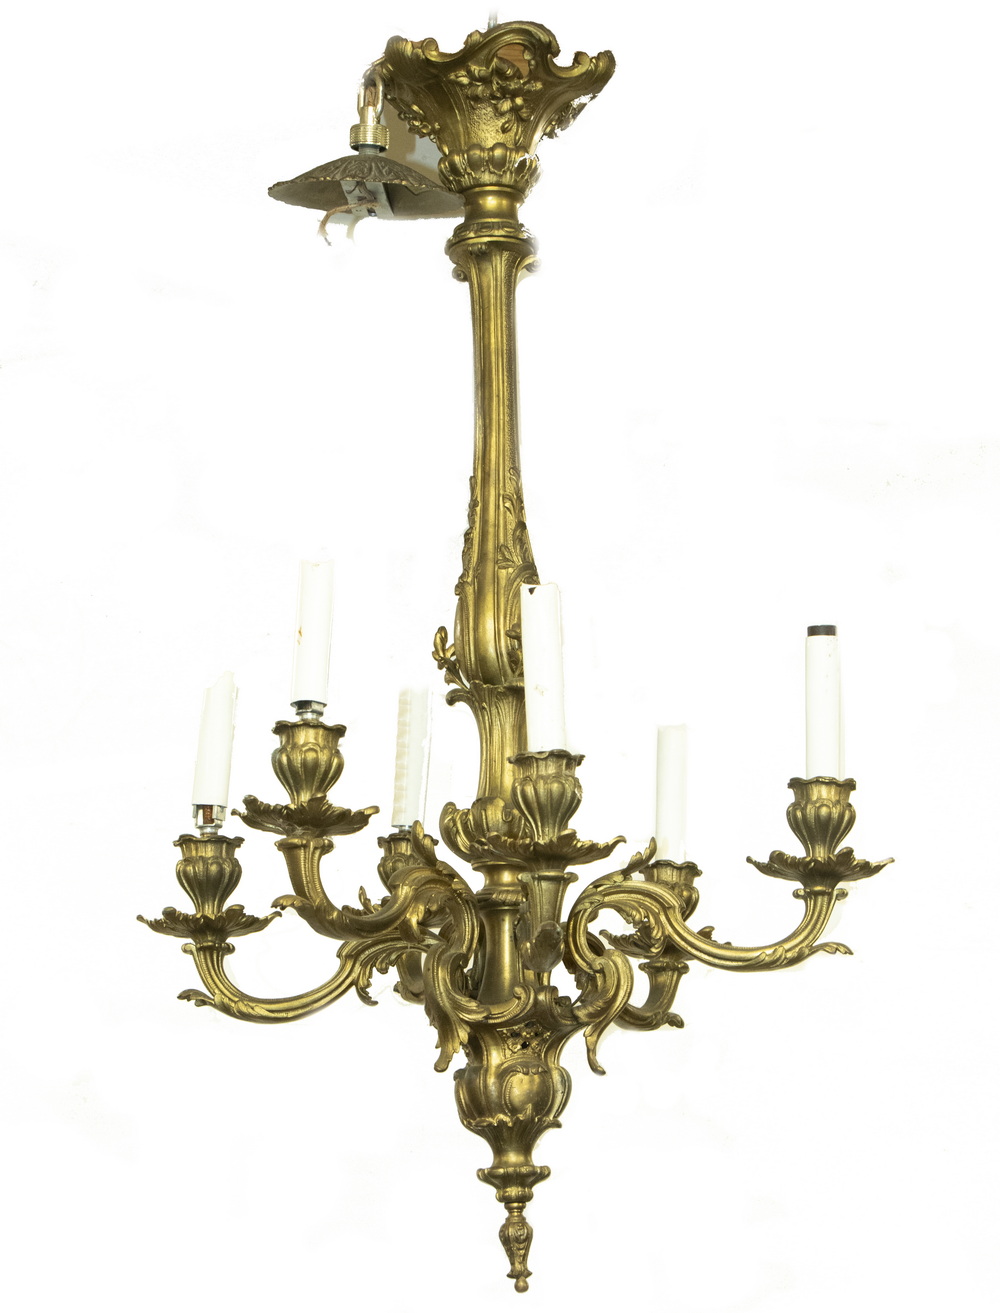 ROCOCO STYLE CHANDELIER 19th c.